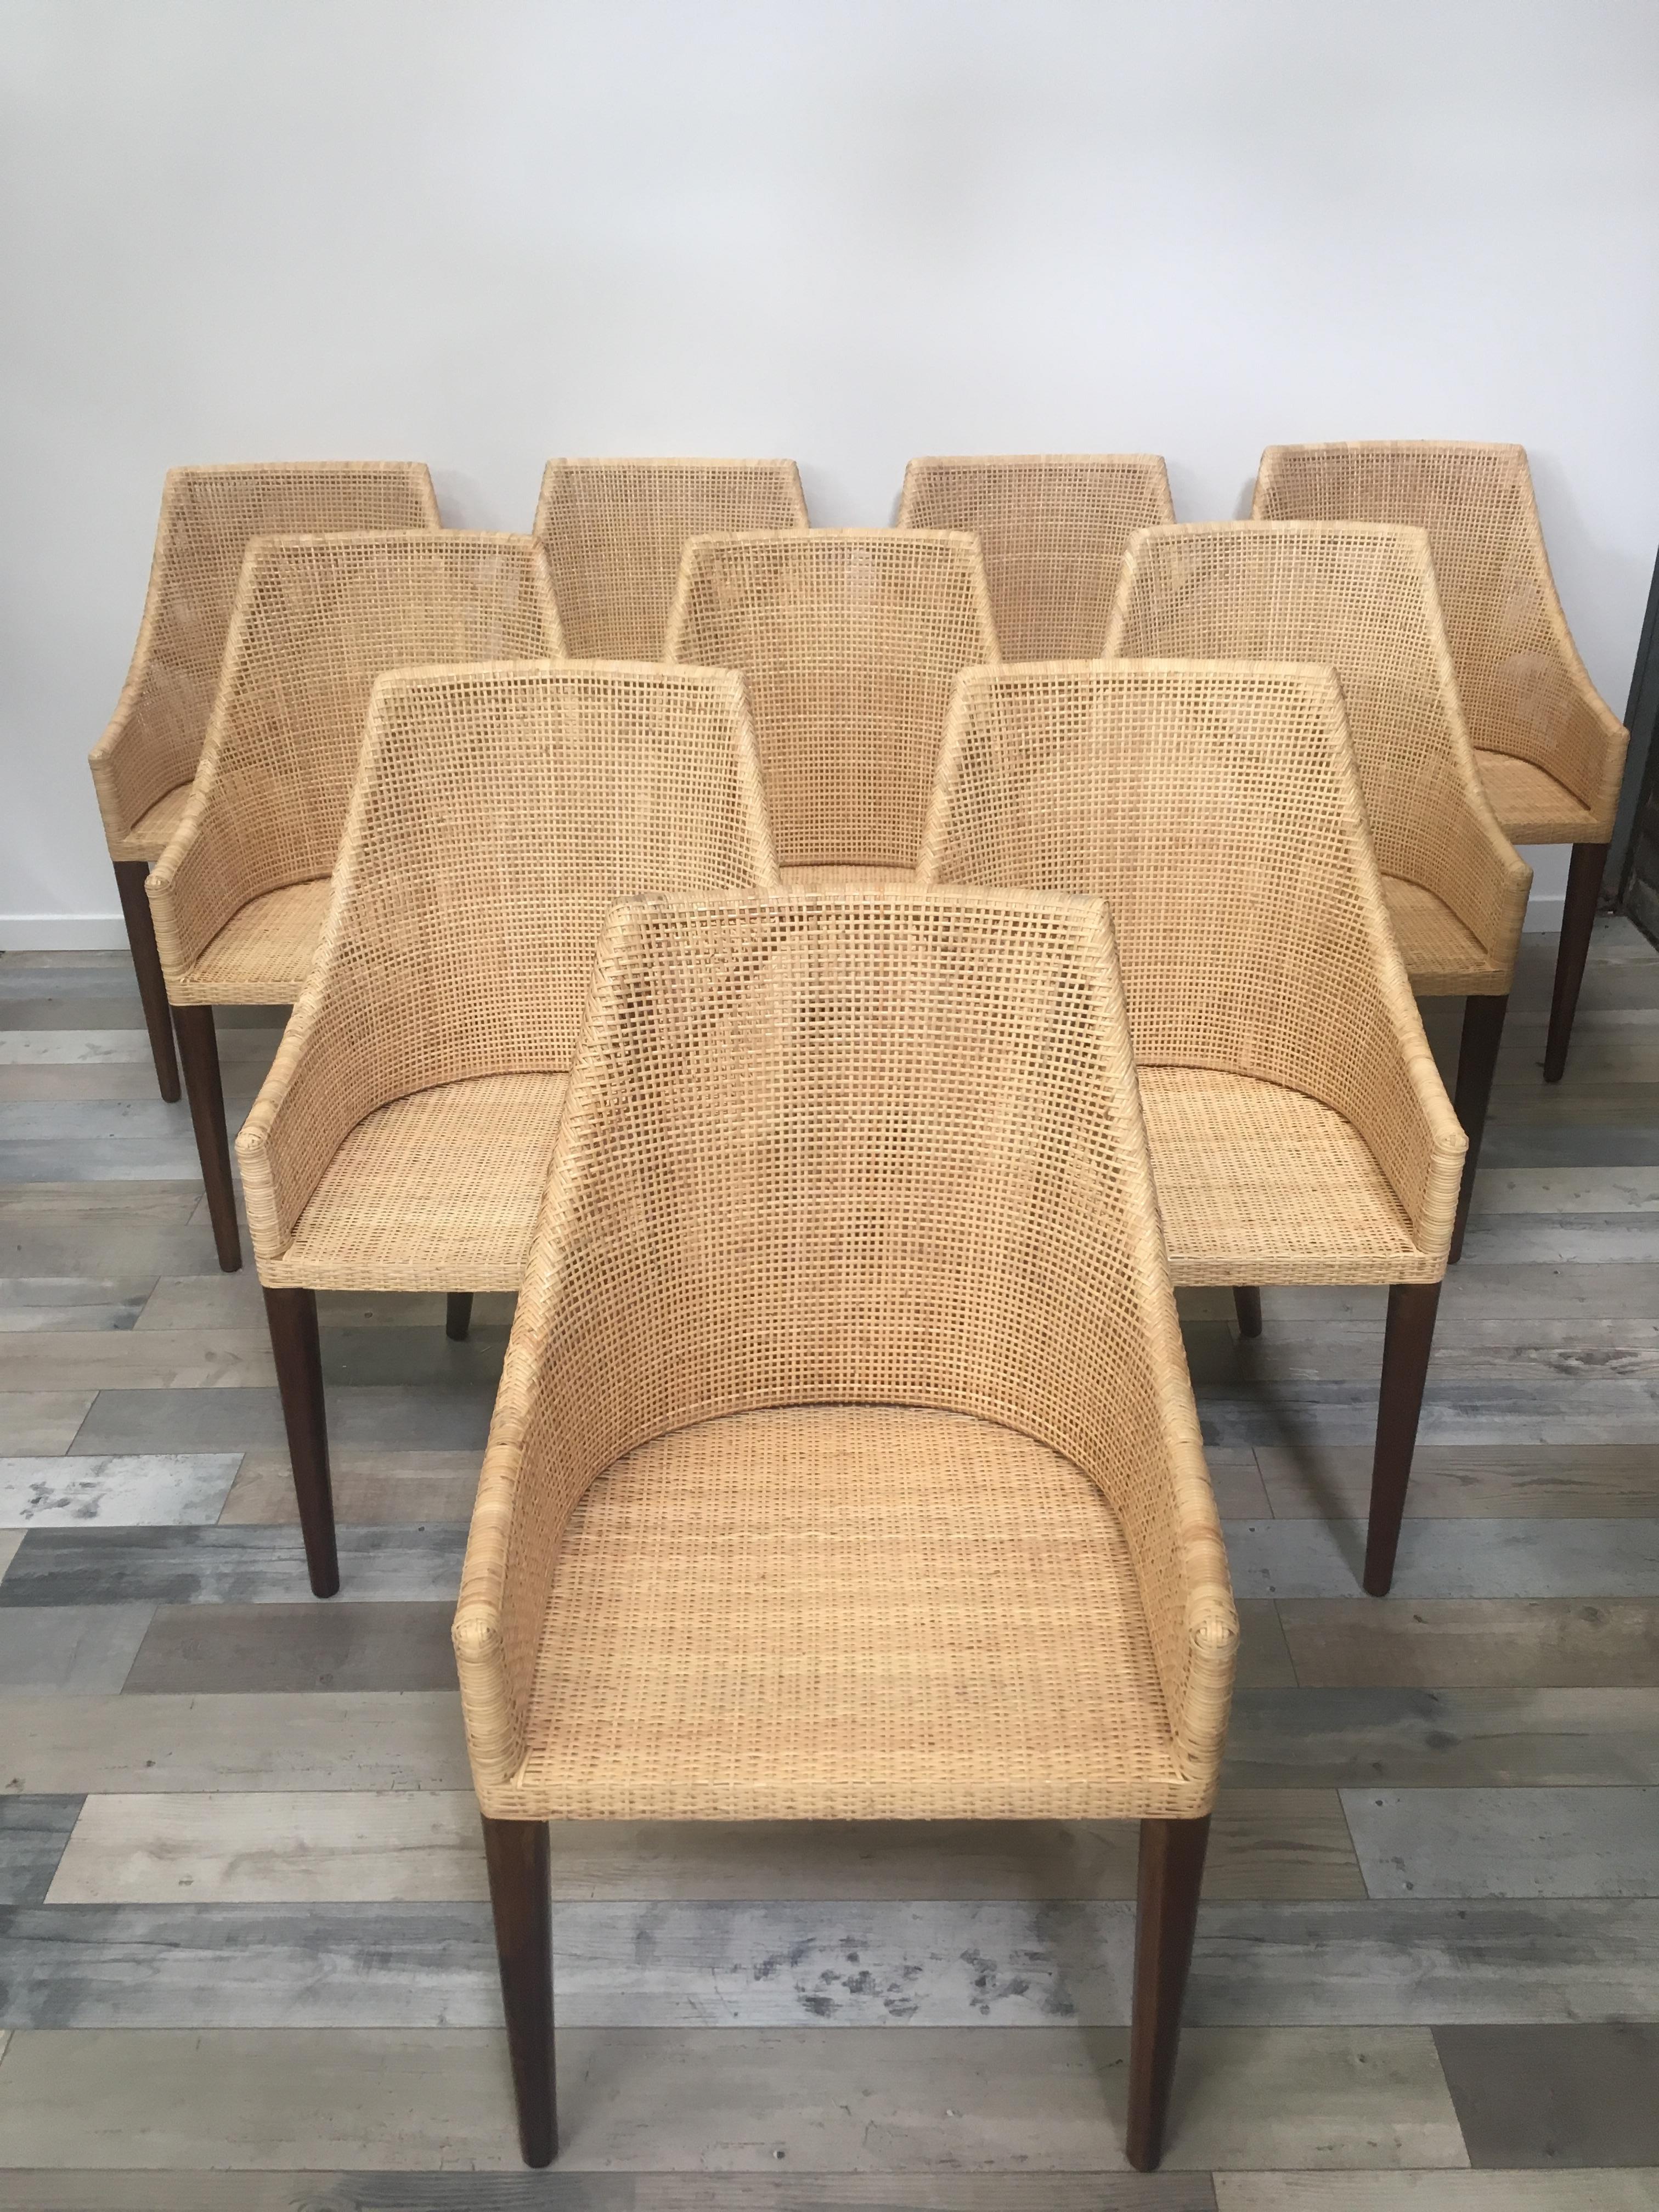 Elegant set of 10 rattan armchairs combining quality, robustness and class. They will be perfect on your terrace, in your veranda, your winter garden, around the dining table and even in your office! In excellent condition (new items, never used).